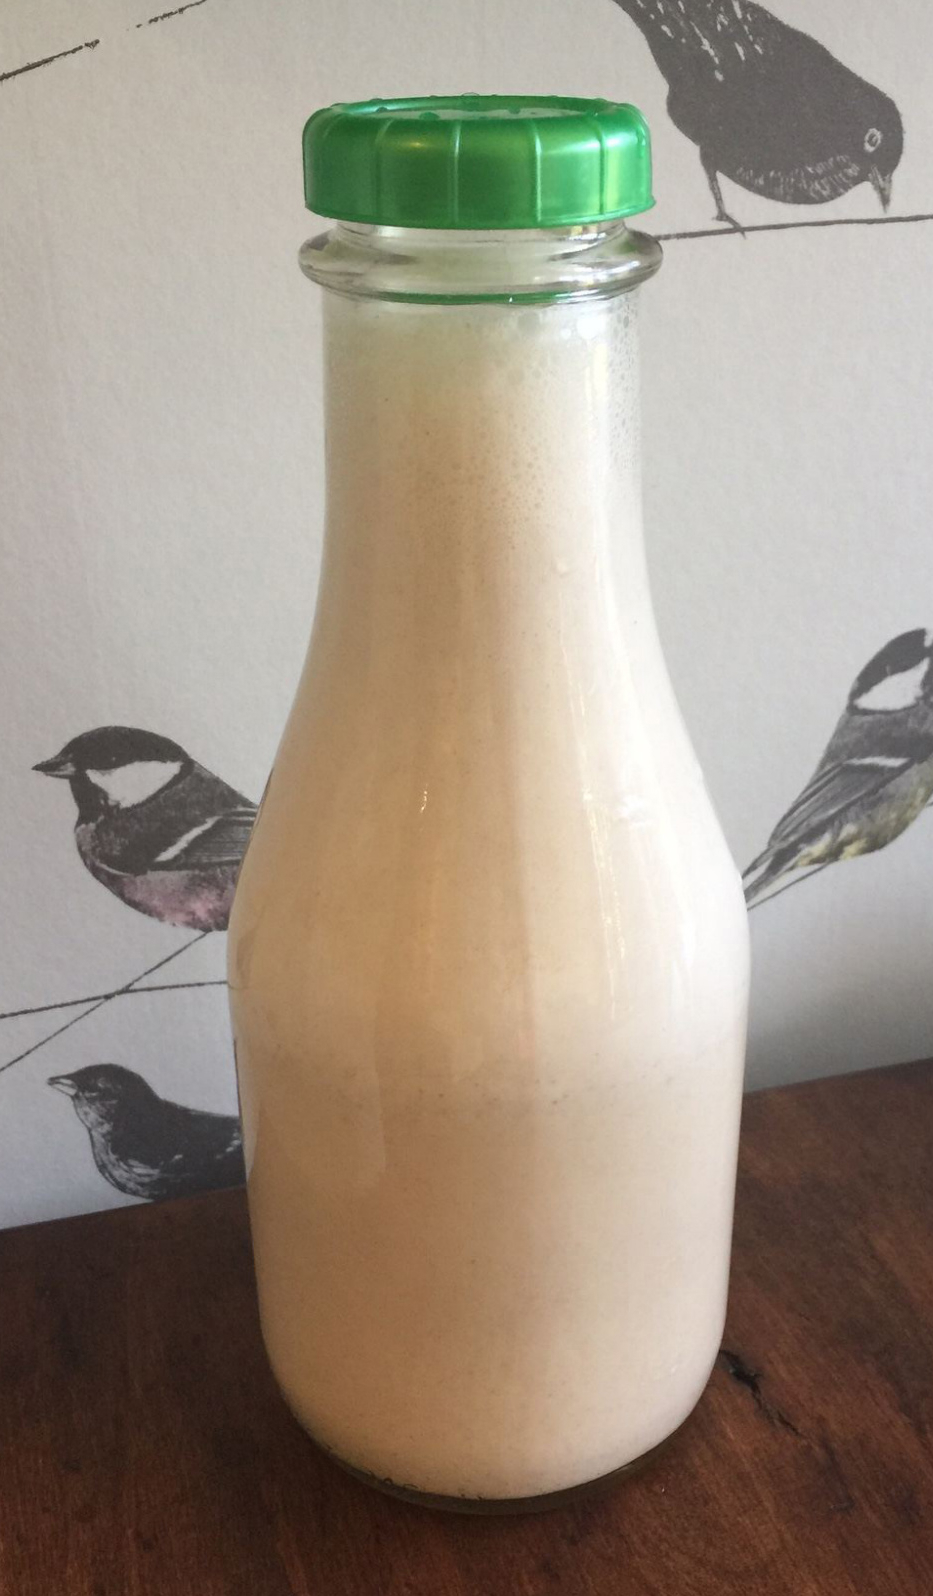 Homemade Almond Milk with New Healthier Options